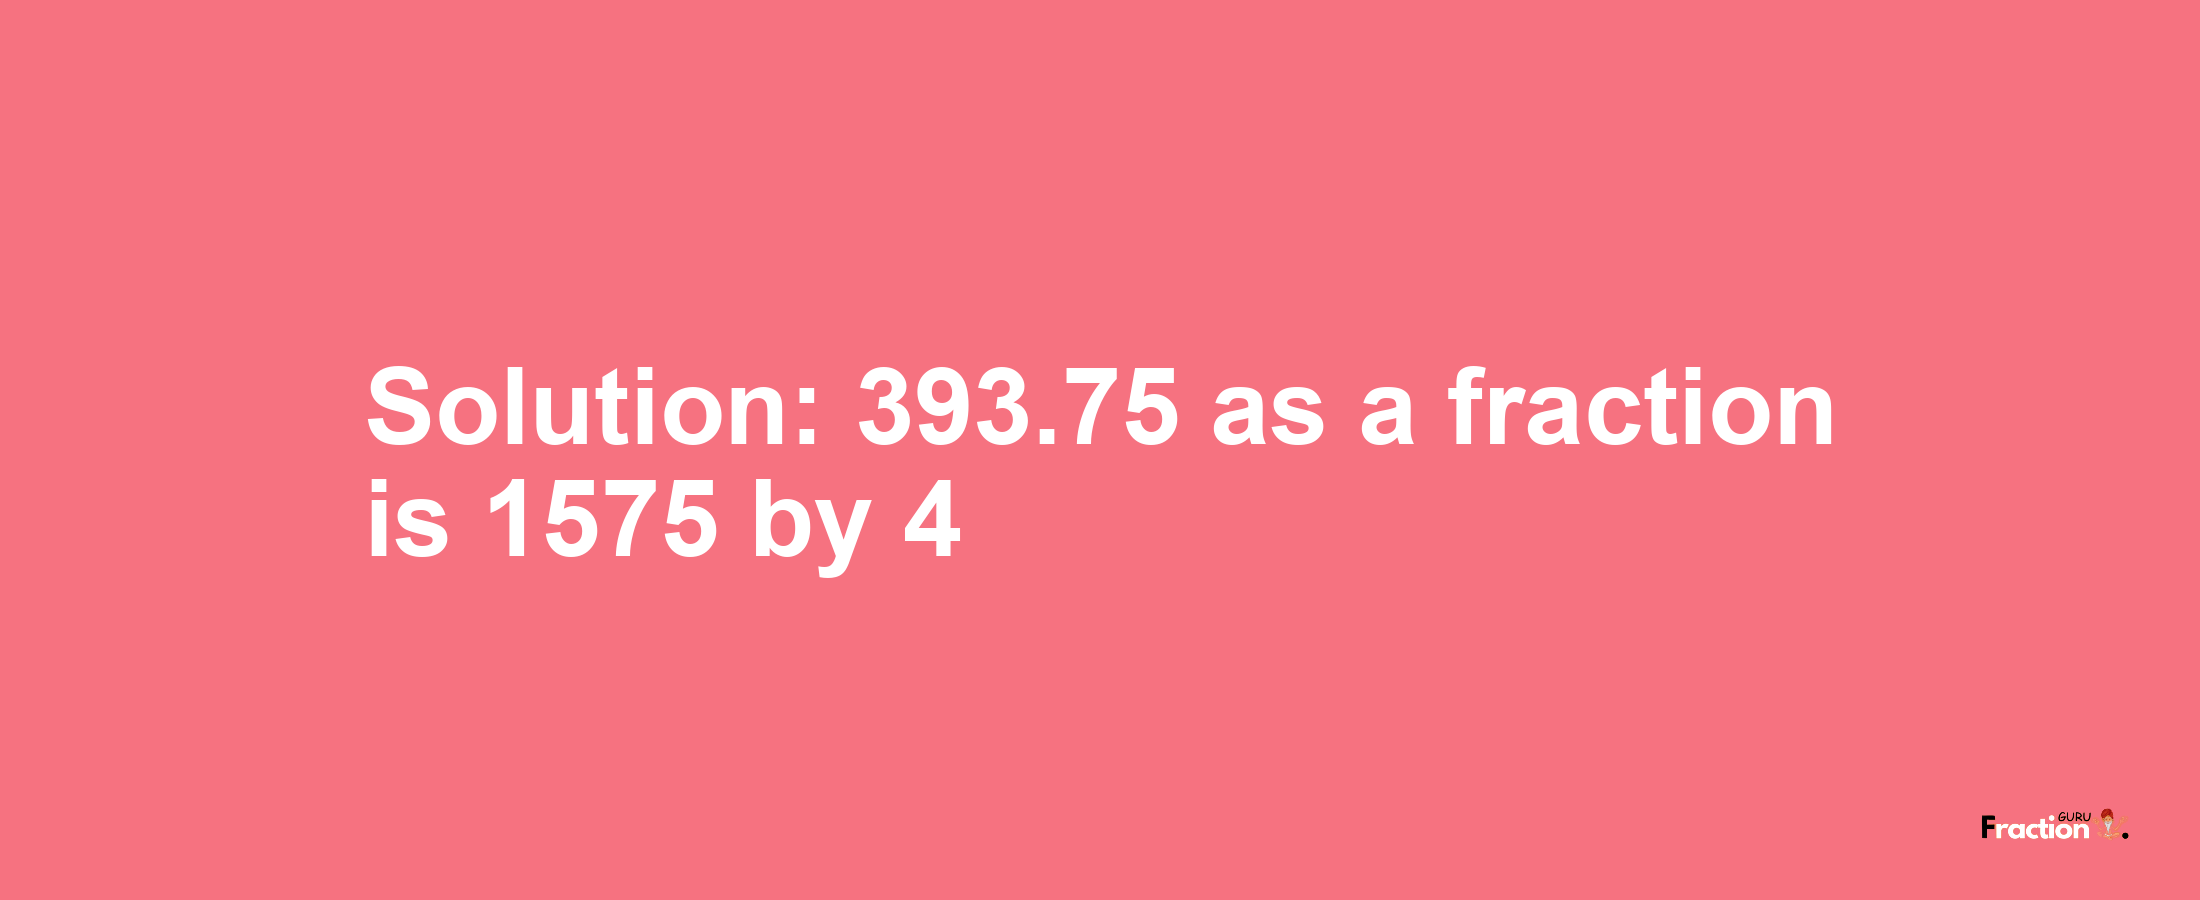 Solution:393.75 as a fraction is 1575/4